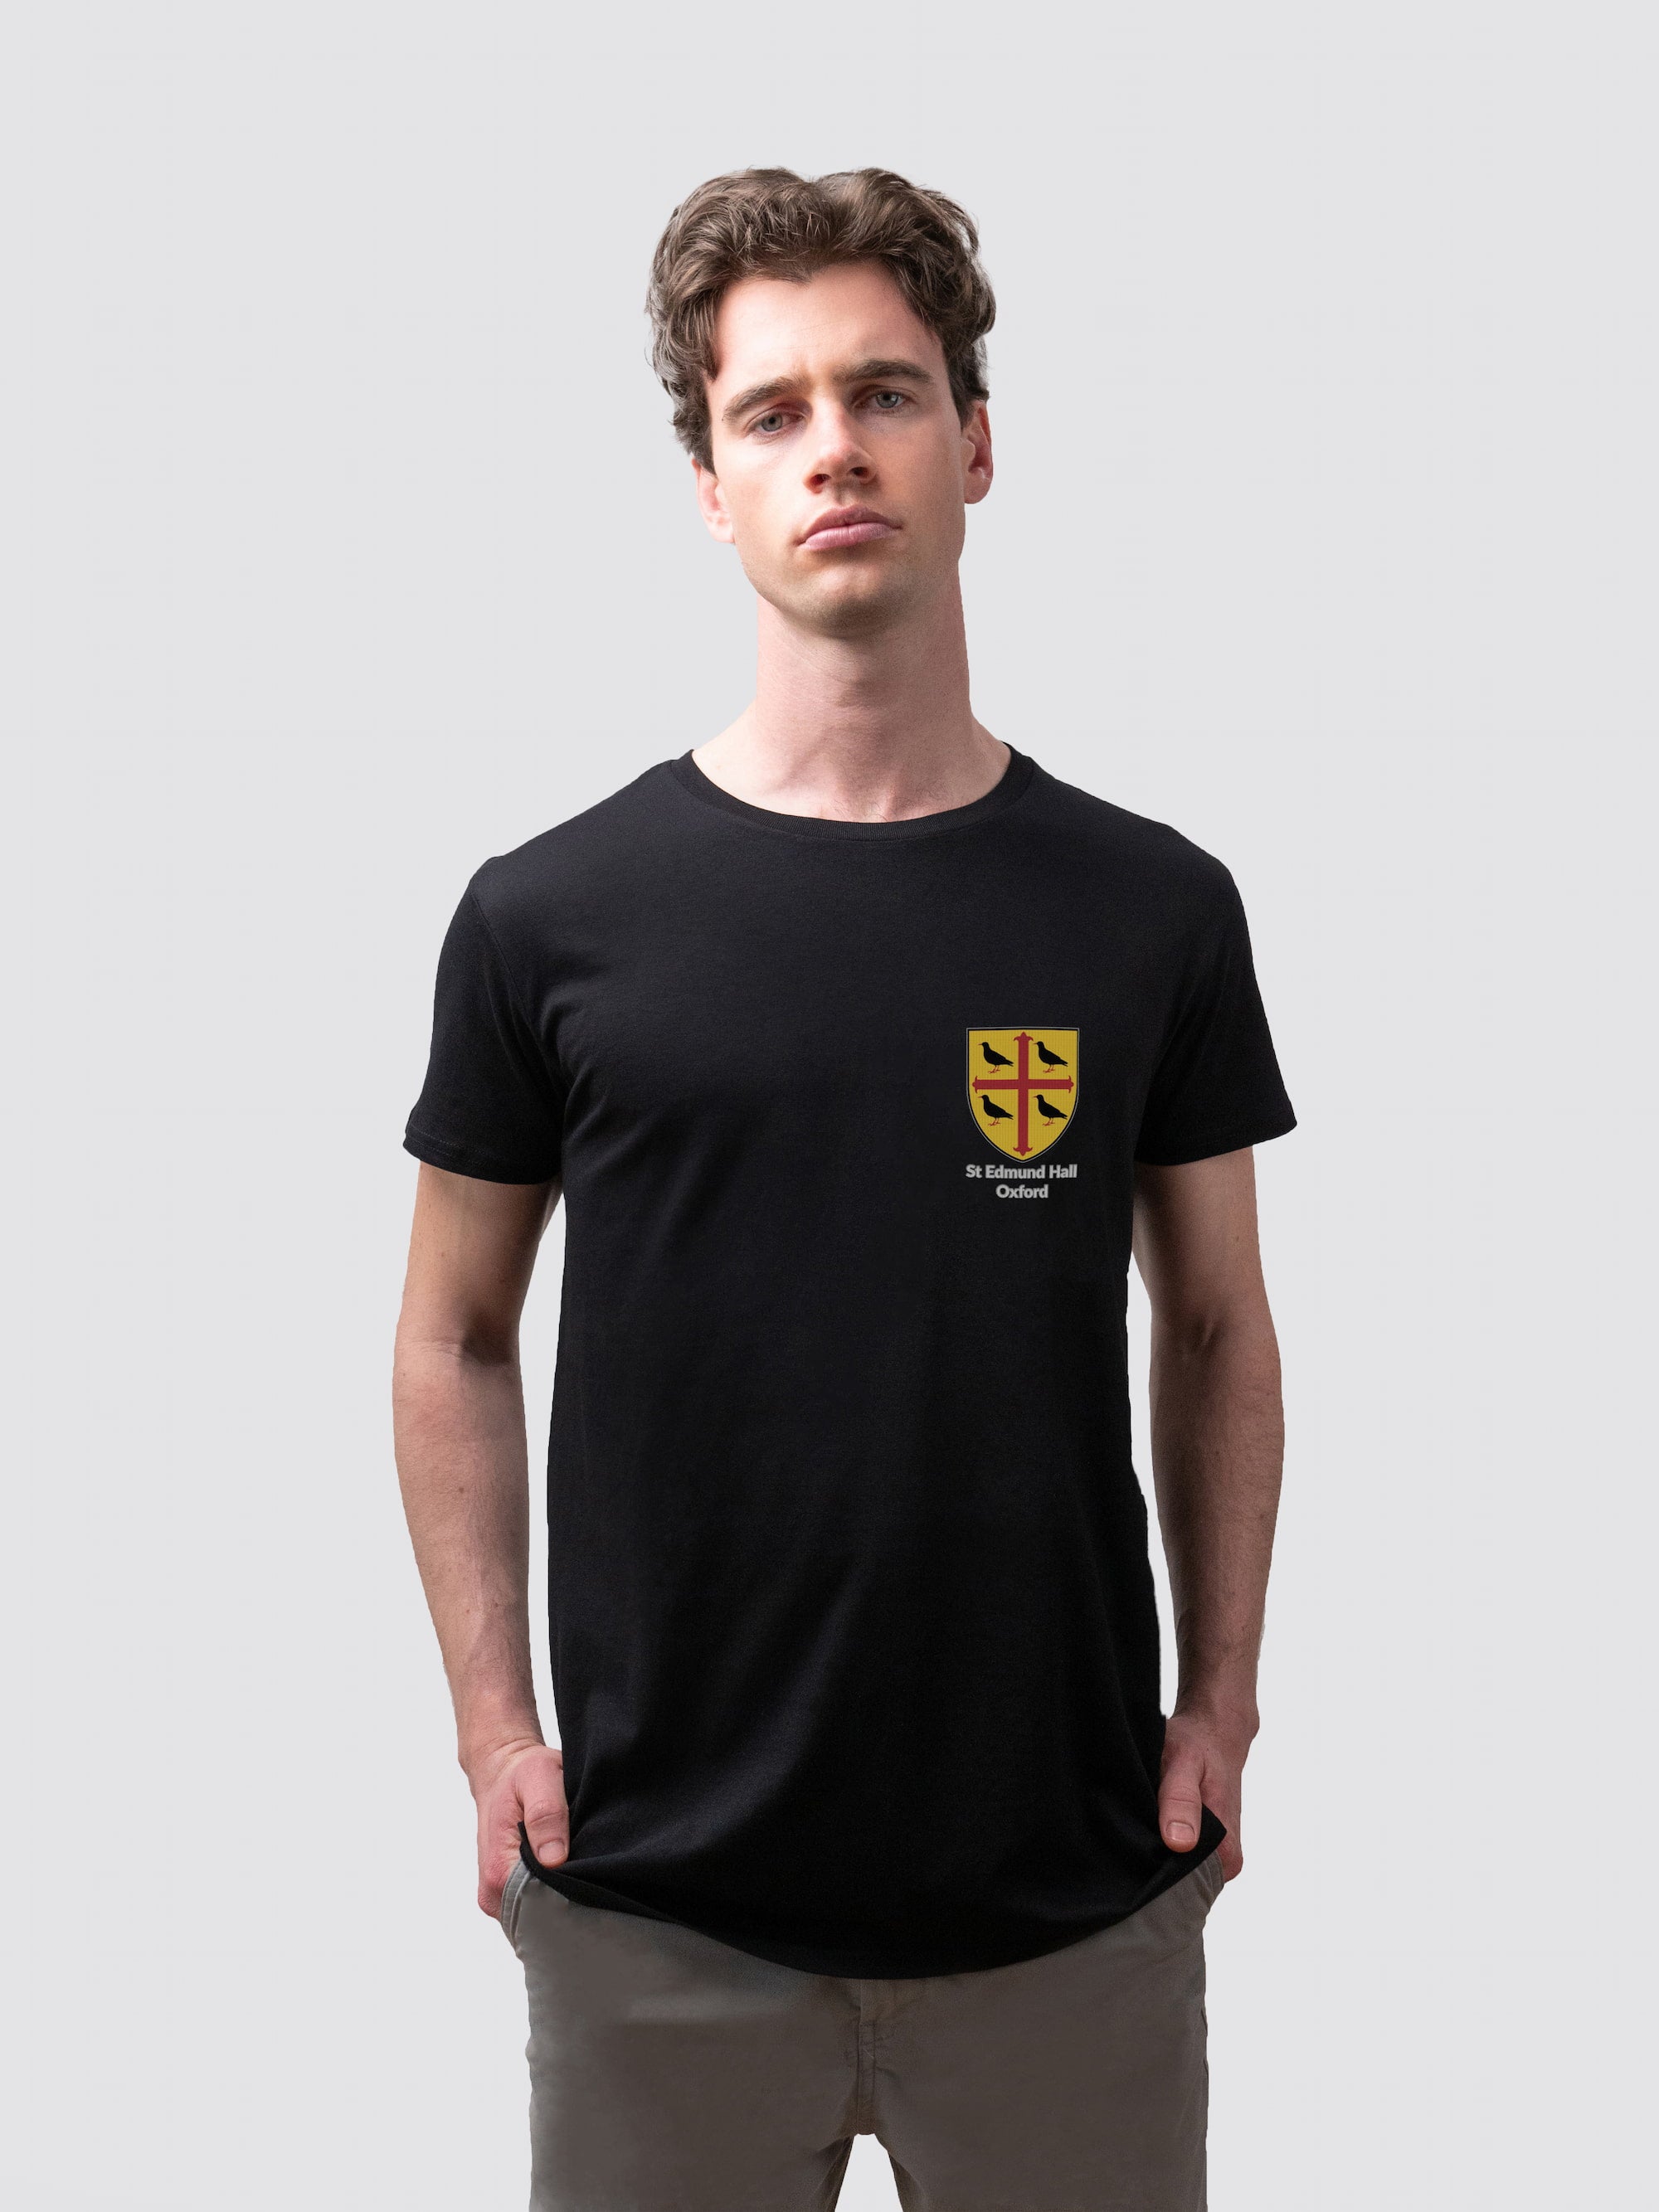 Sustainable St Edmund Hall t-shirt, made from organic cotton